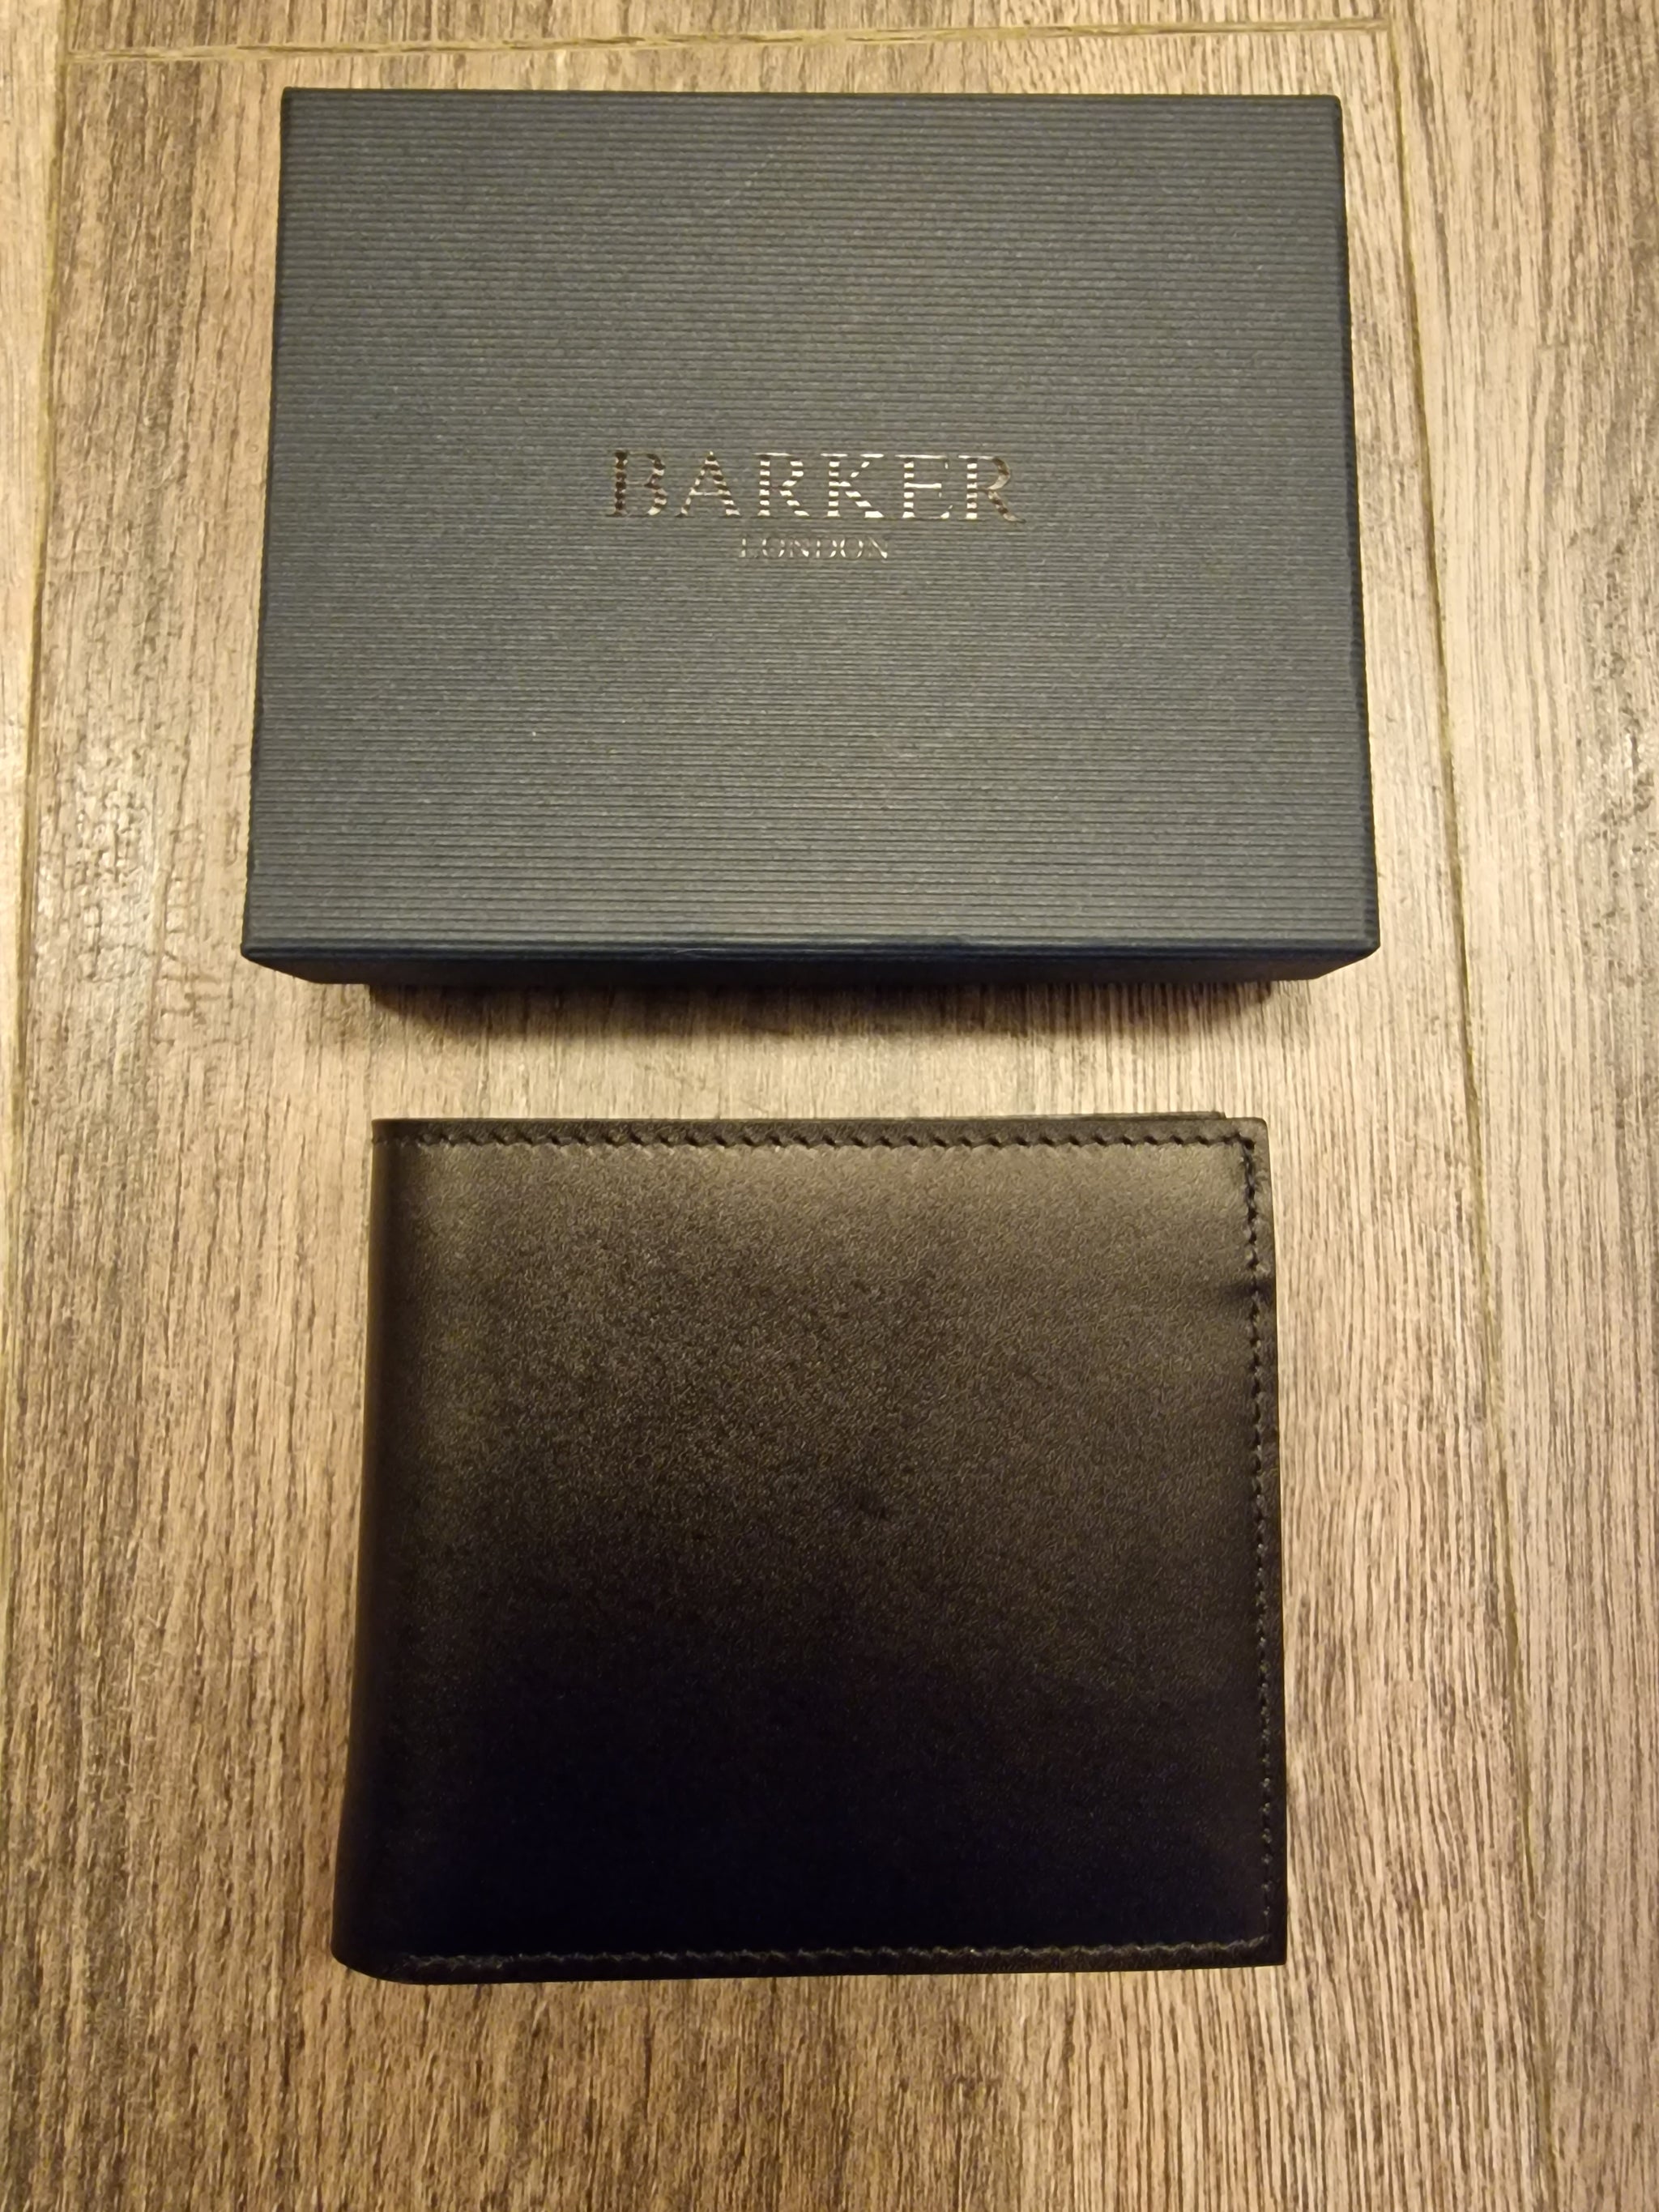 Barkers Shoes Bifold "One Stripe" Wallets